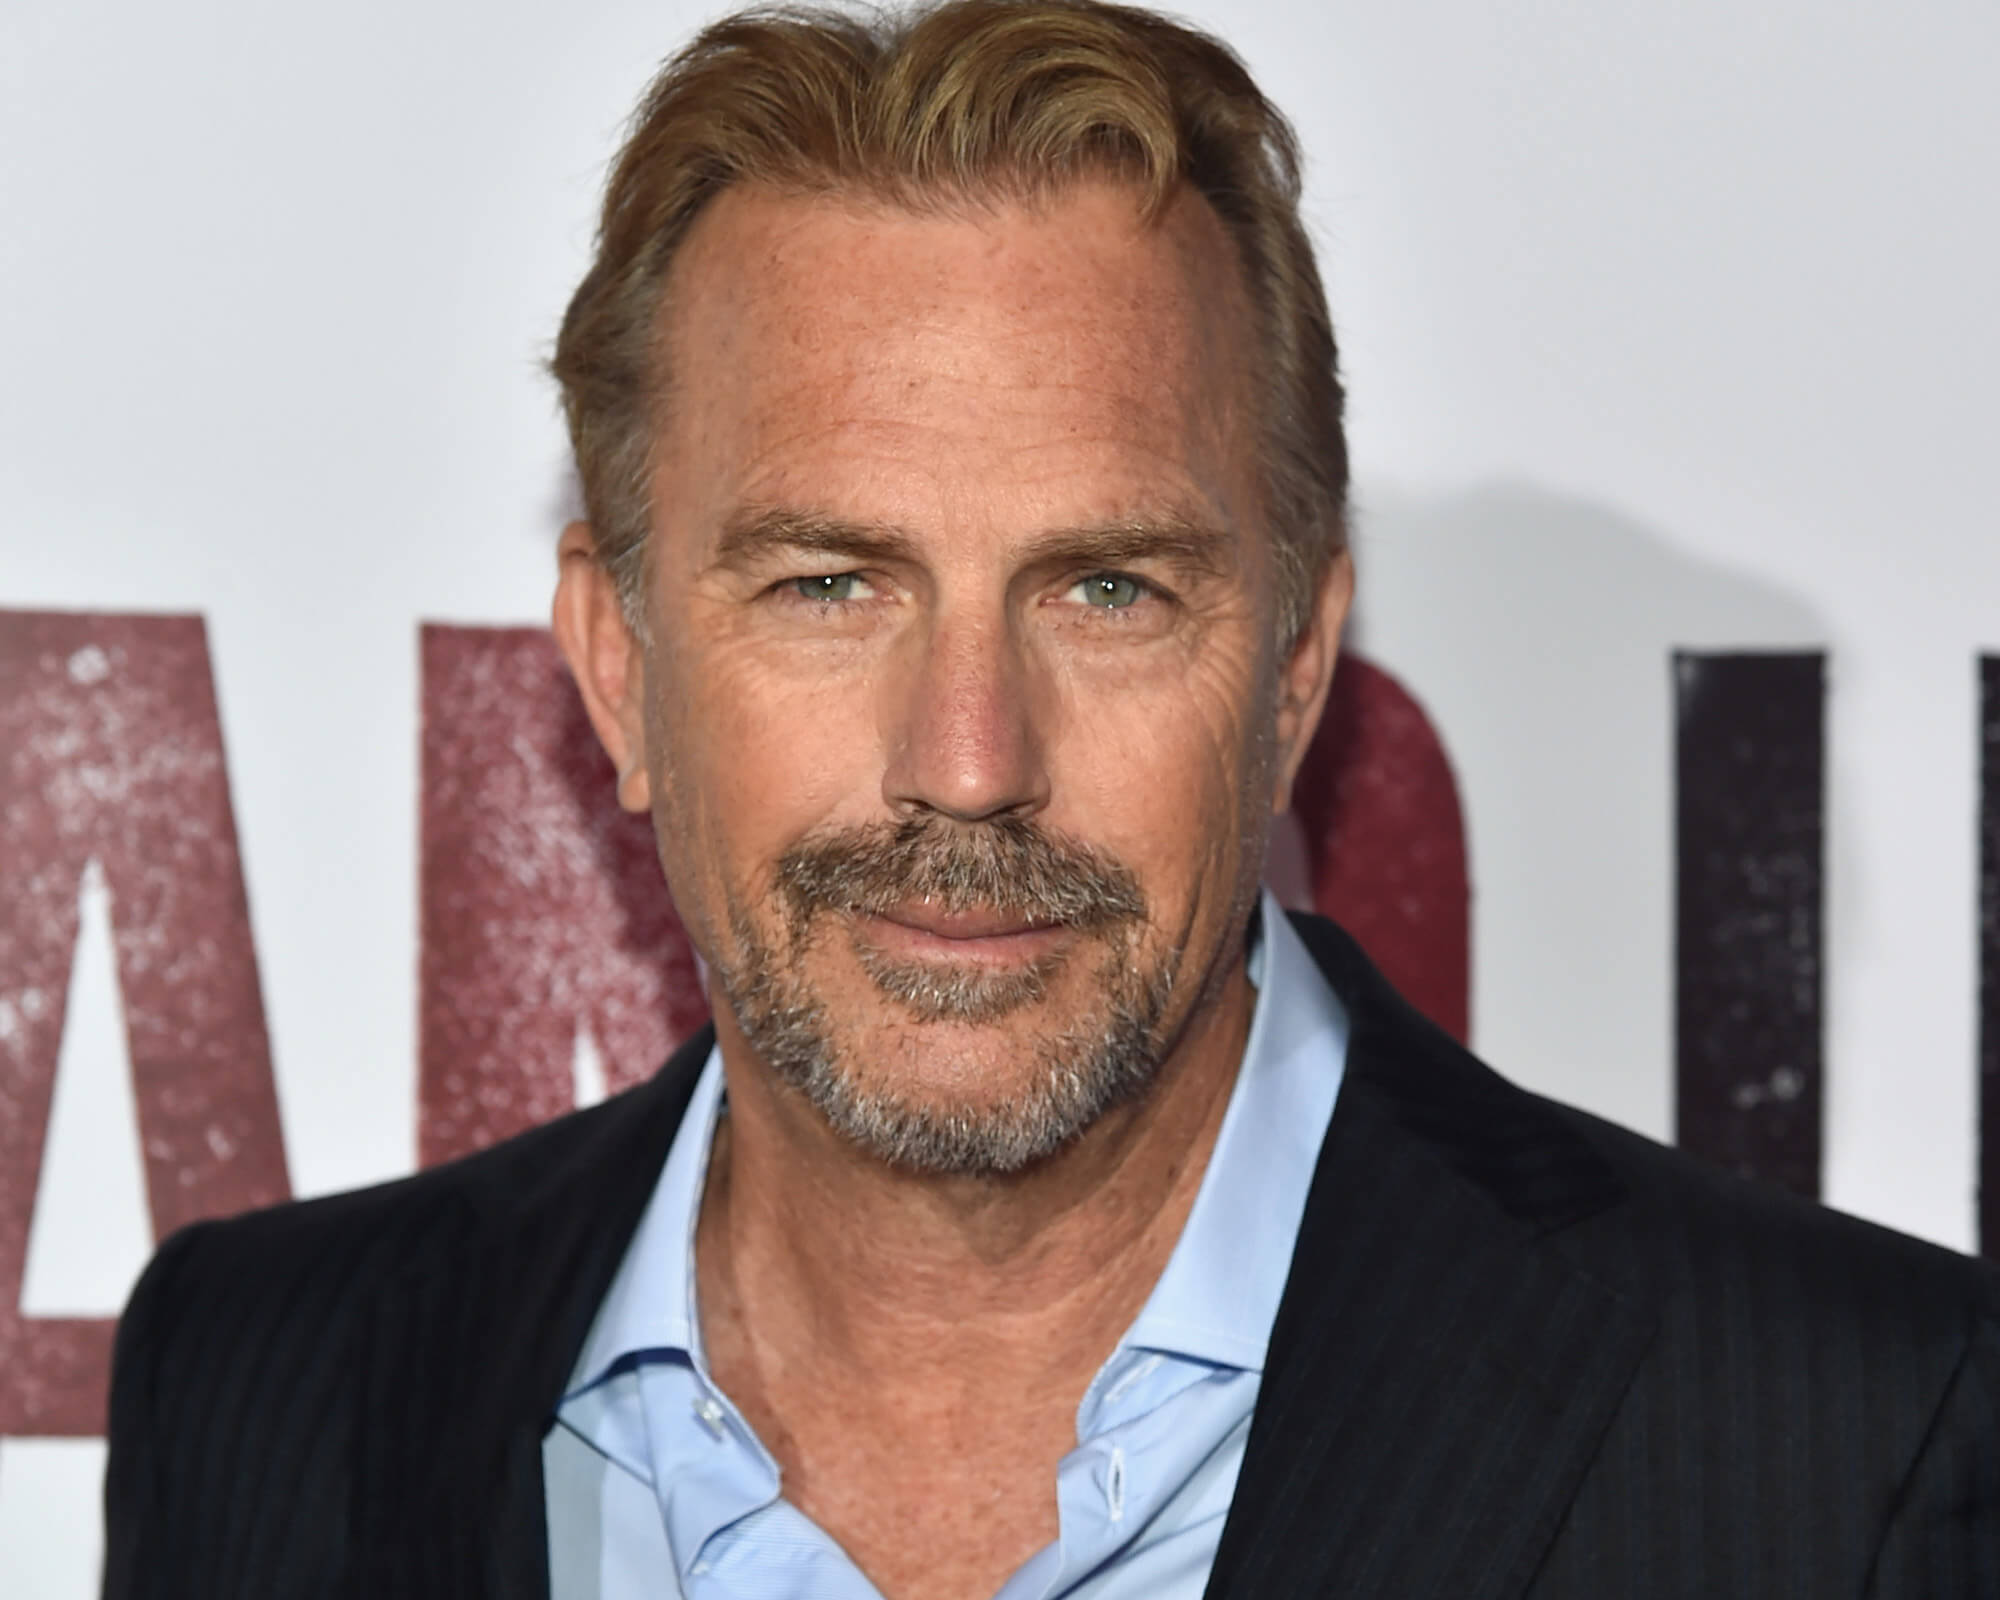 Kevin Costner - "It's time we woke up to reality" - FHH ...